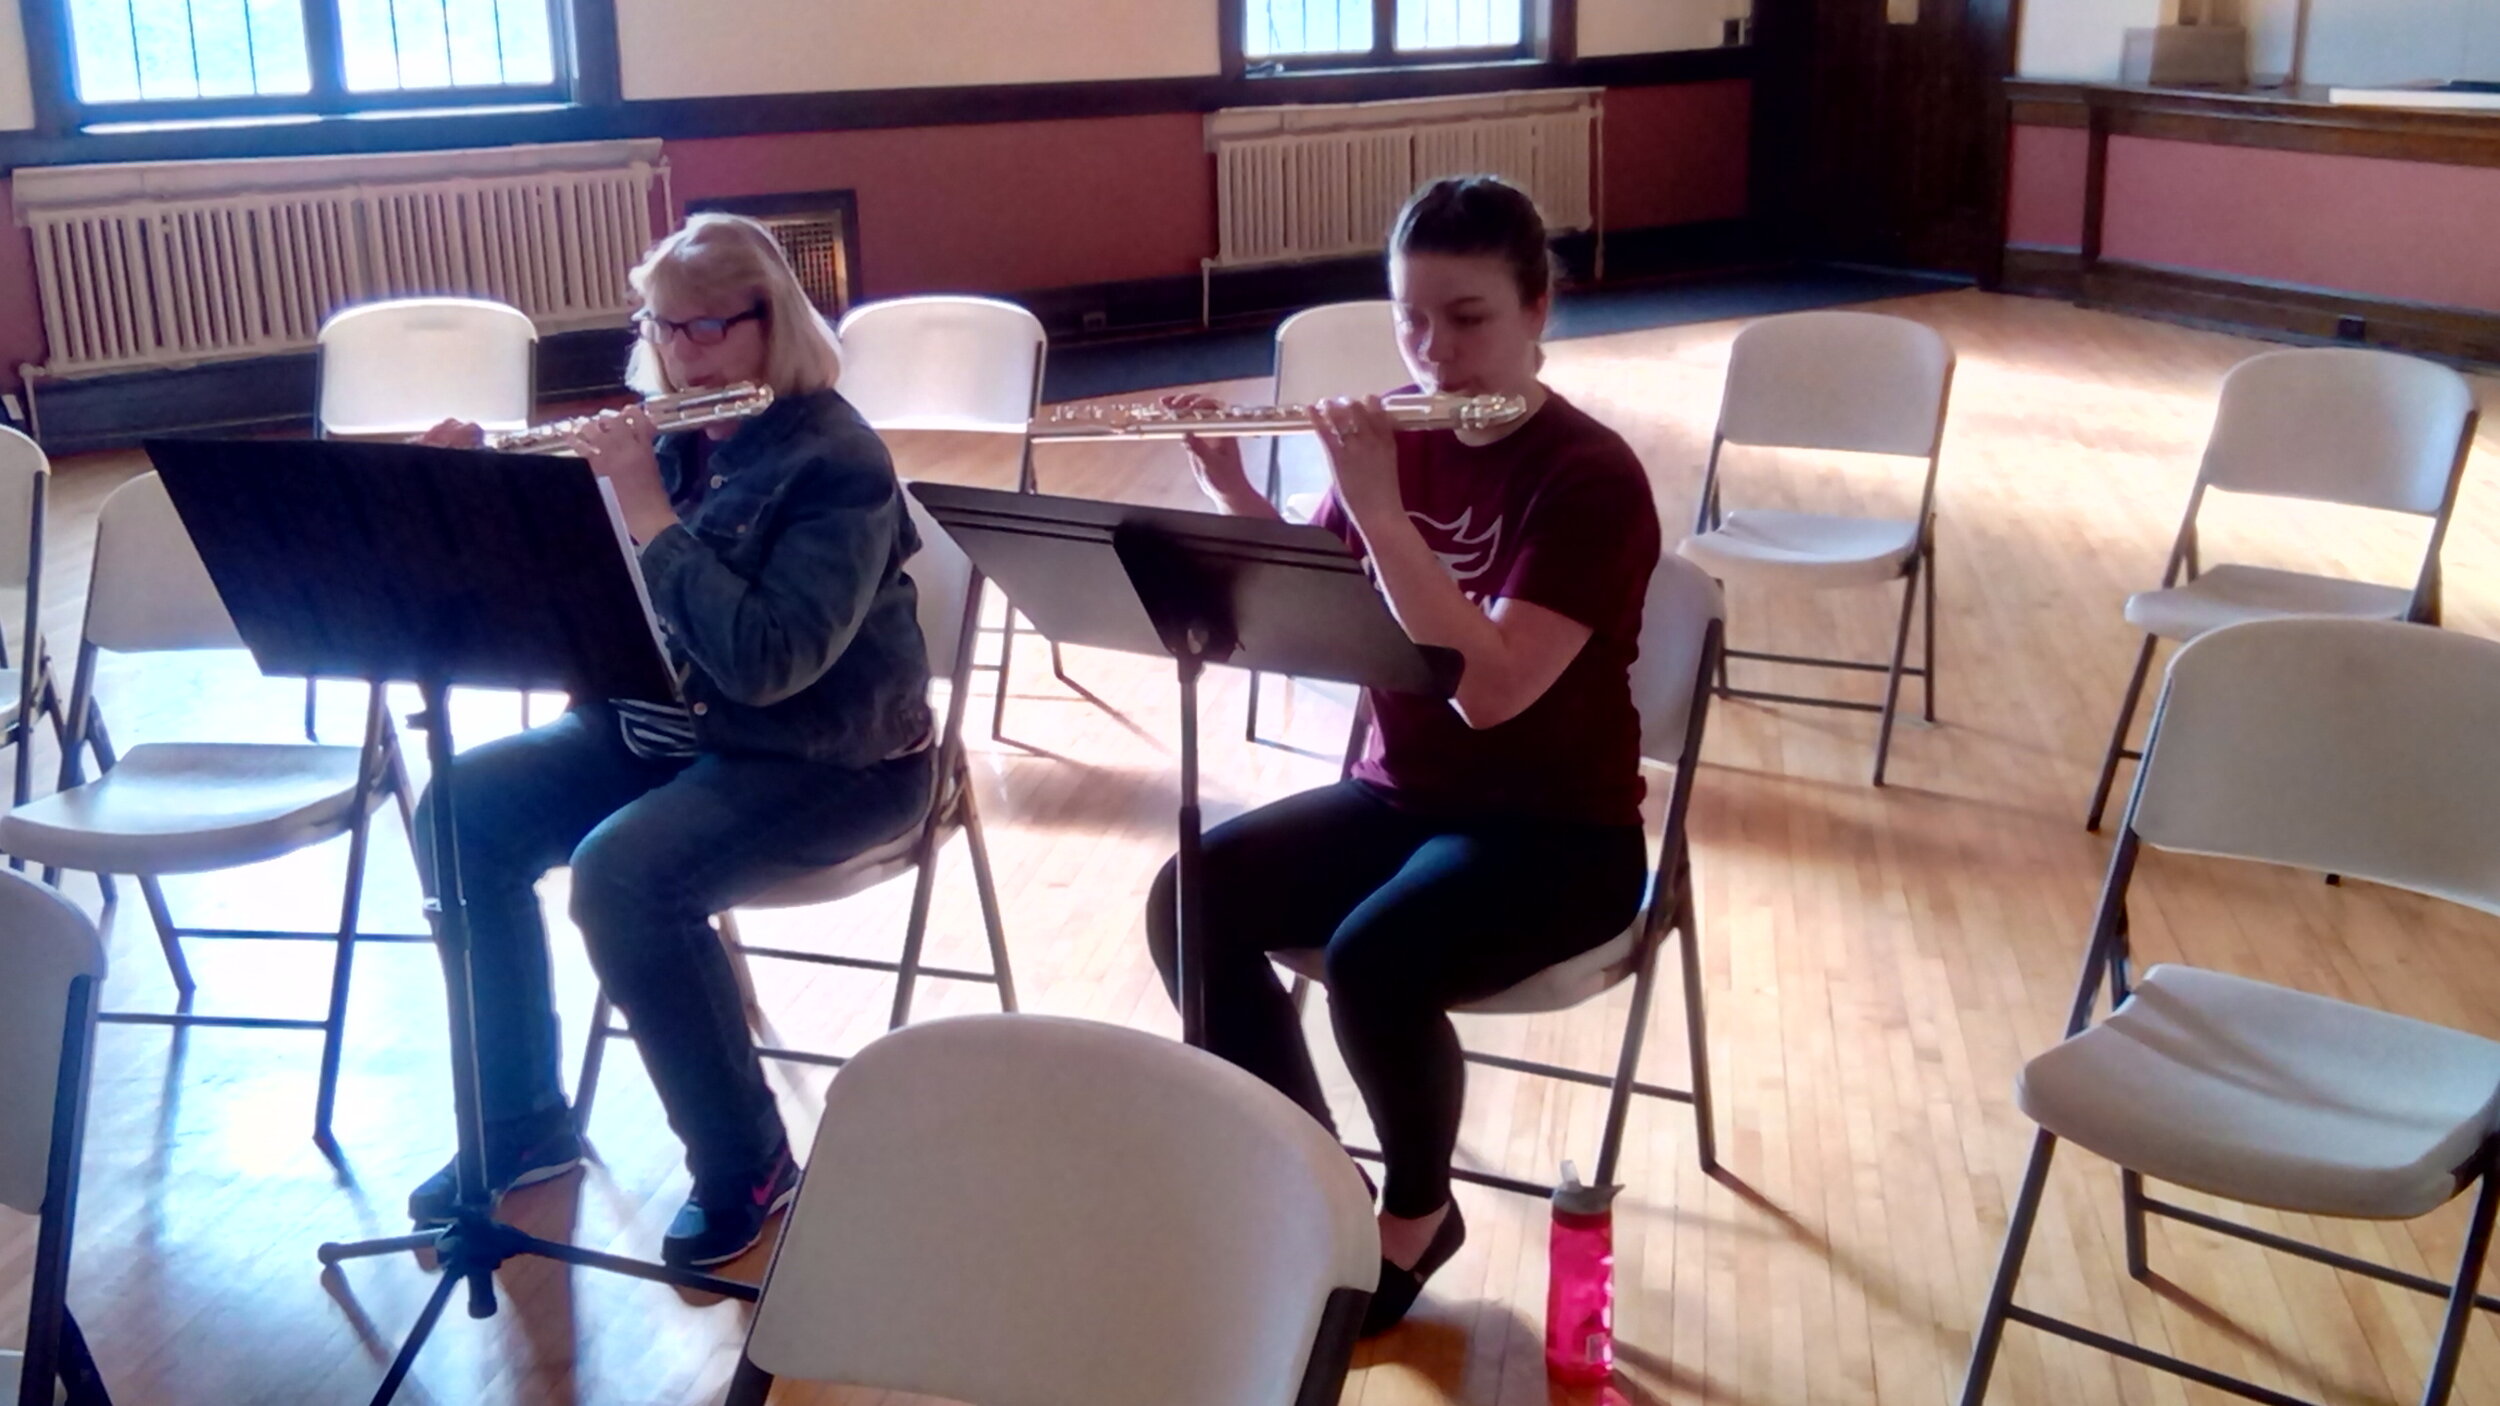 Members playing alto and bass flute